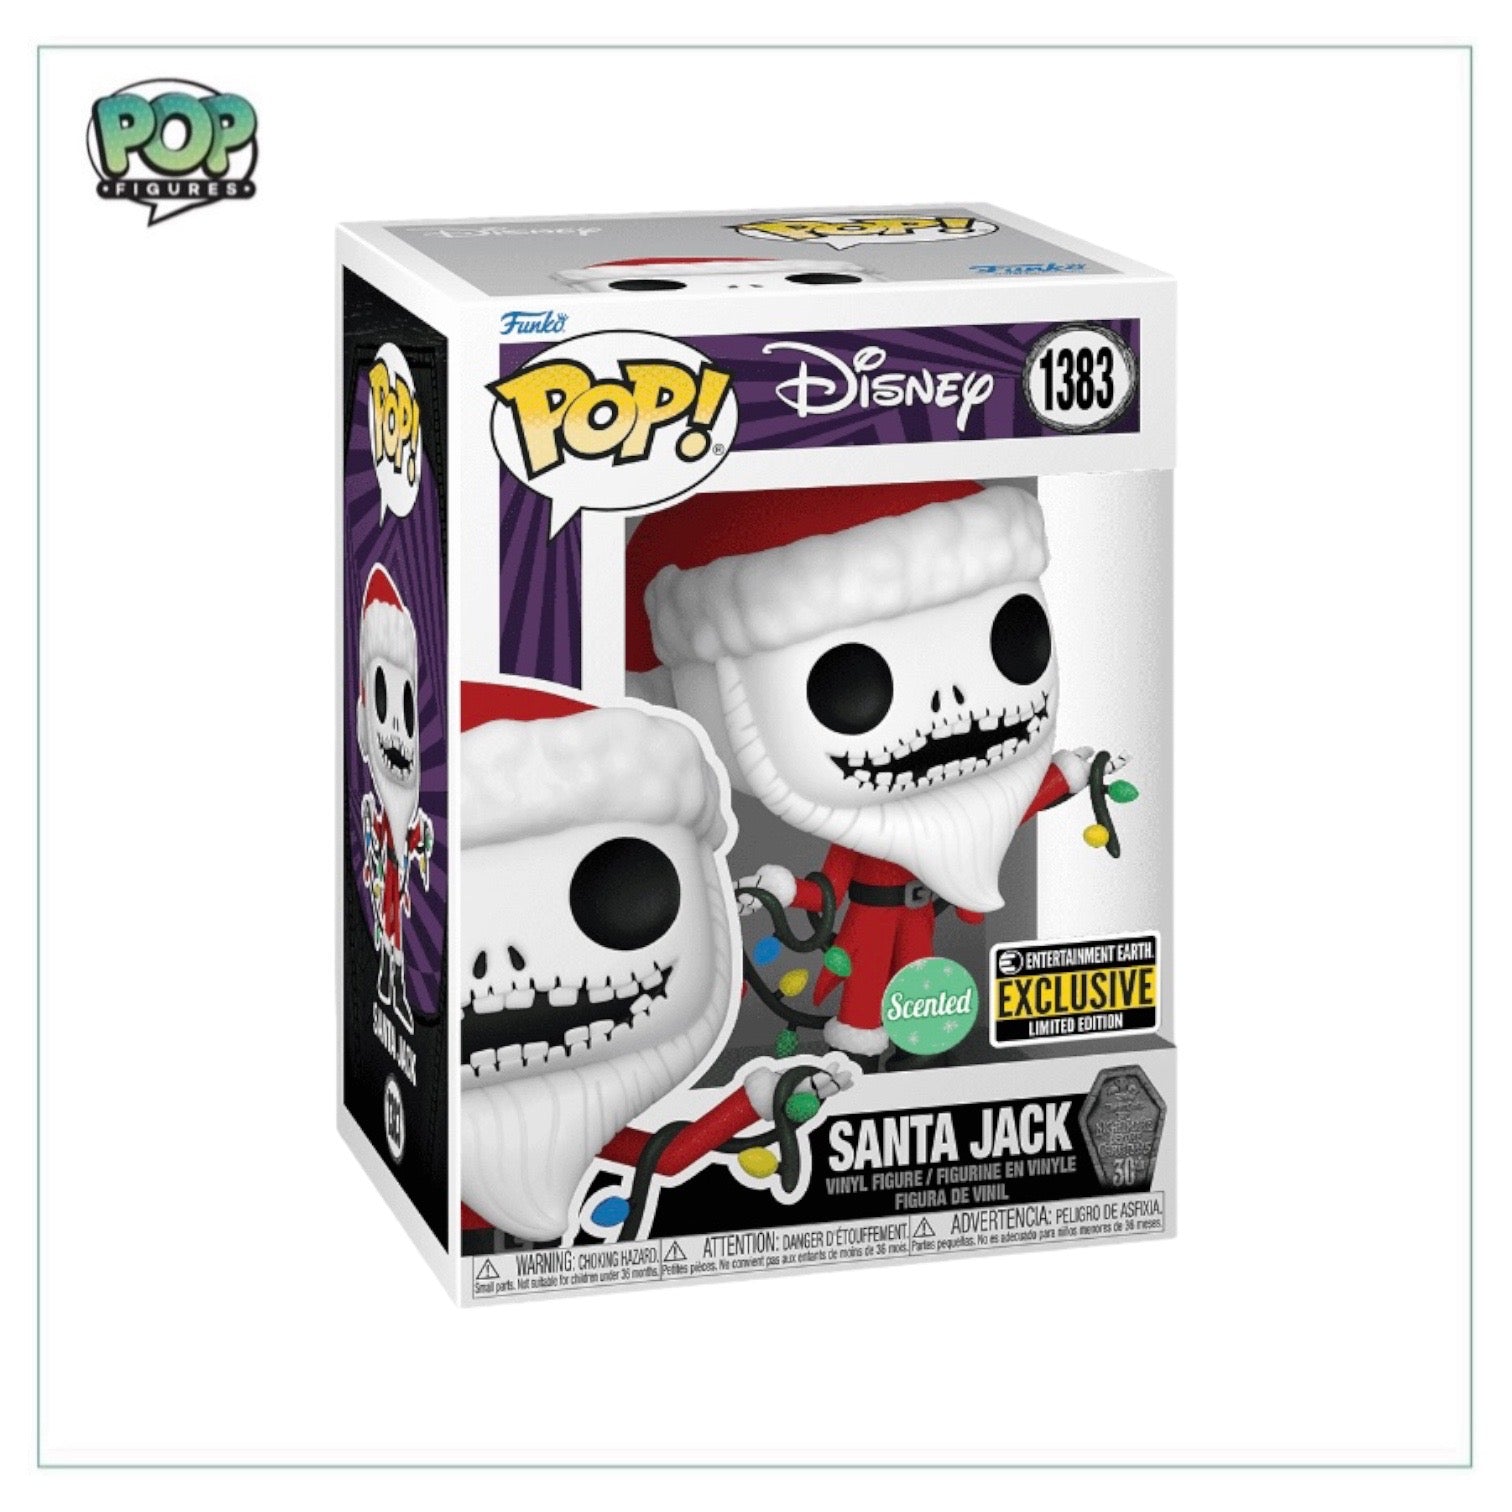 Santa Jack #1383 (Scented) Funko Pop! - The Nightmare Before Christmas - Entertainment Earth Exclusive